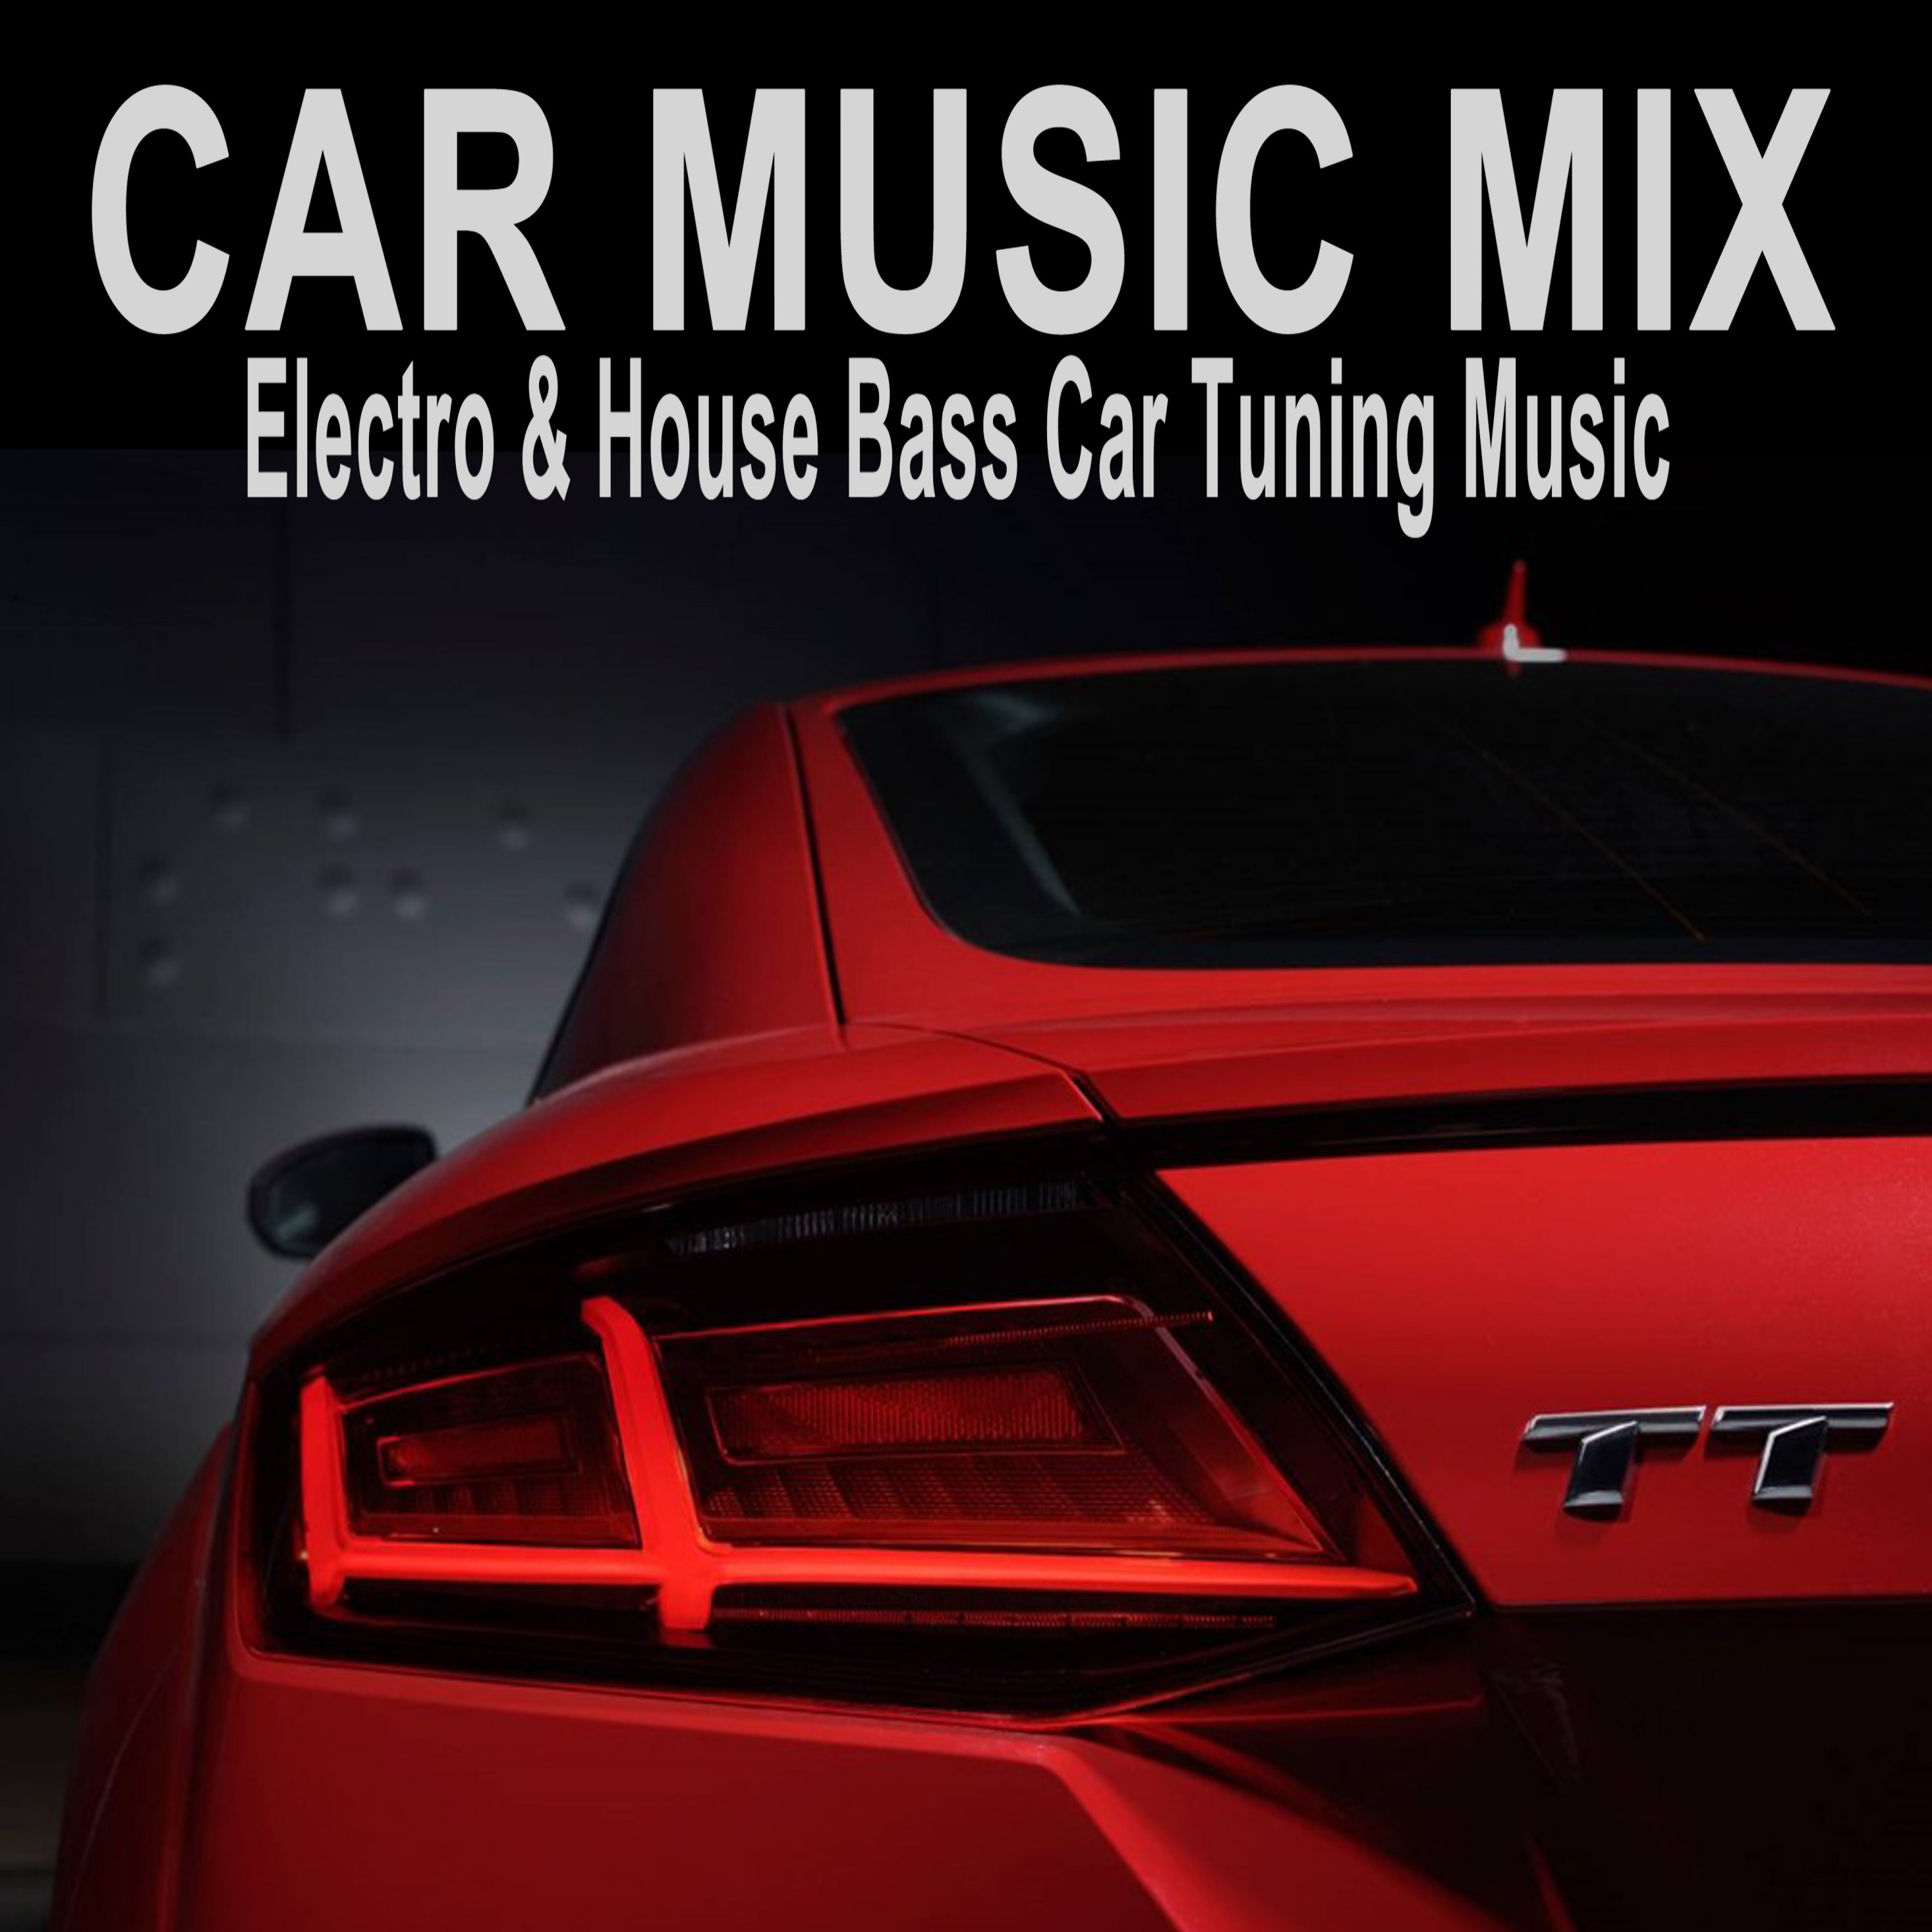 Car Music Mix (EDM, Electro & House Bass Car Tuning Music - Warning Penalties for Speeding at Own Risk!)